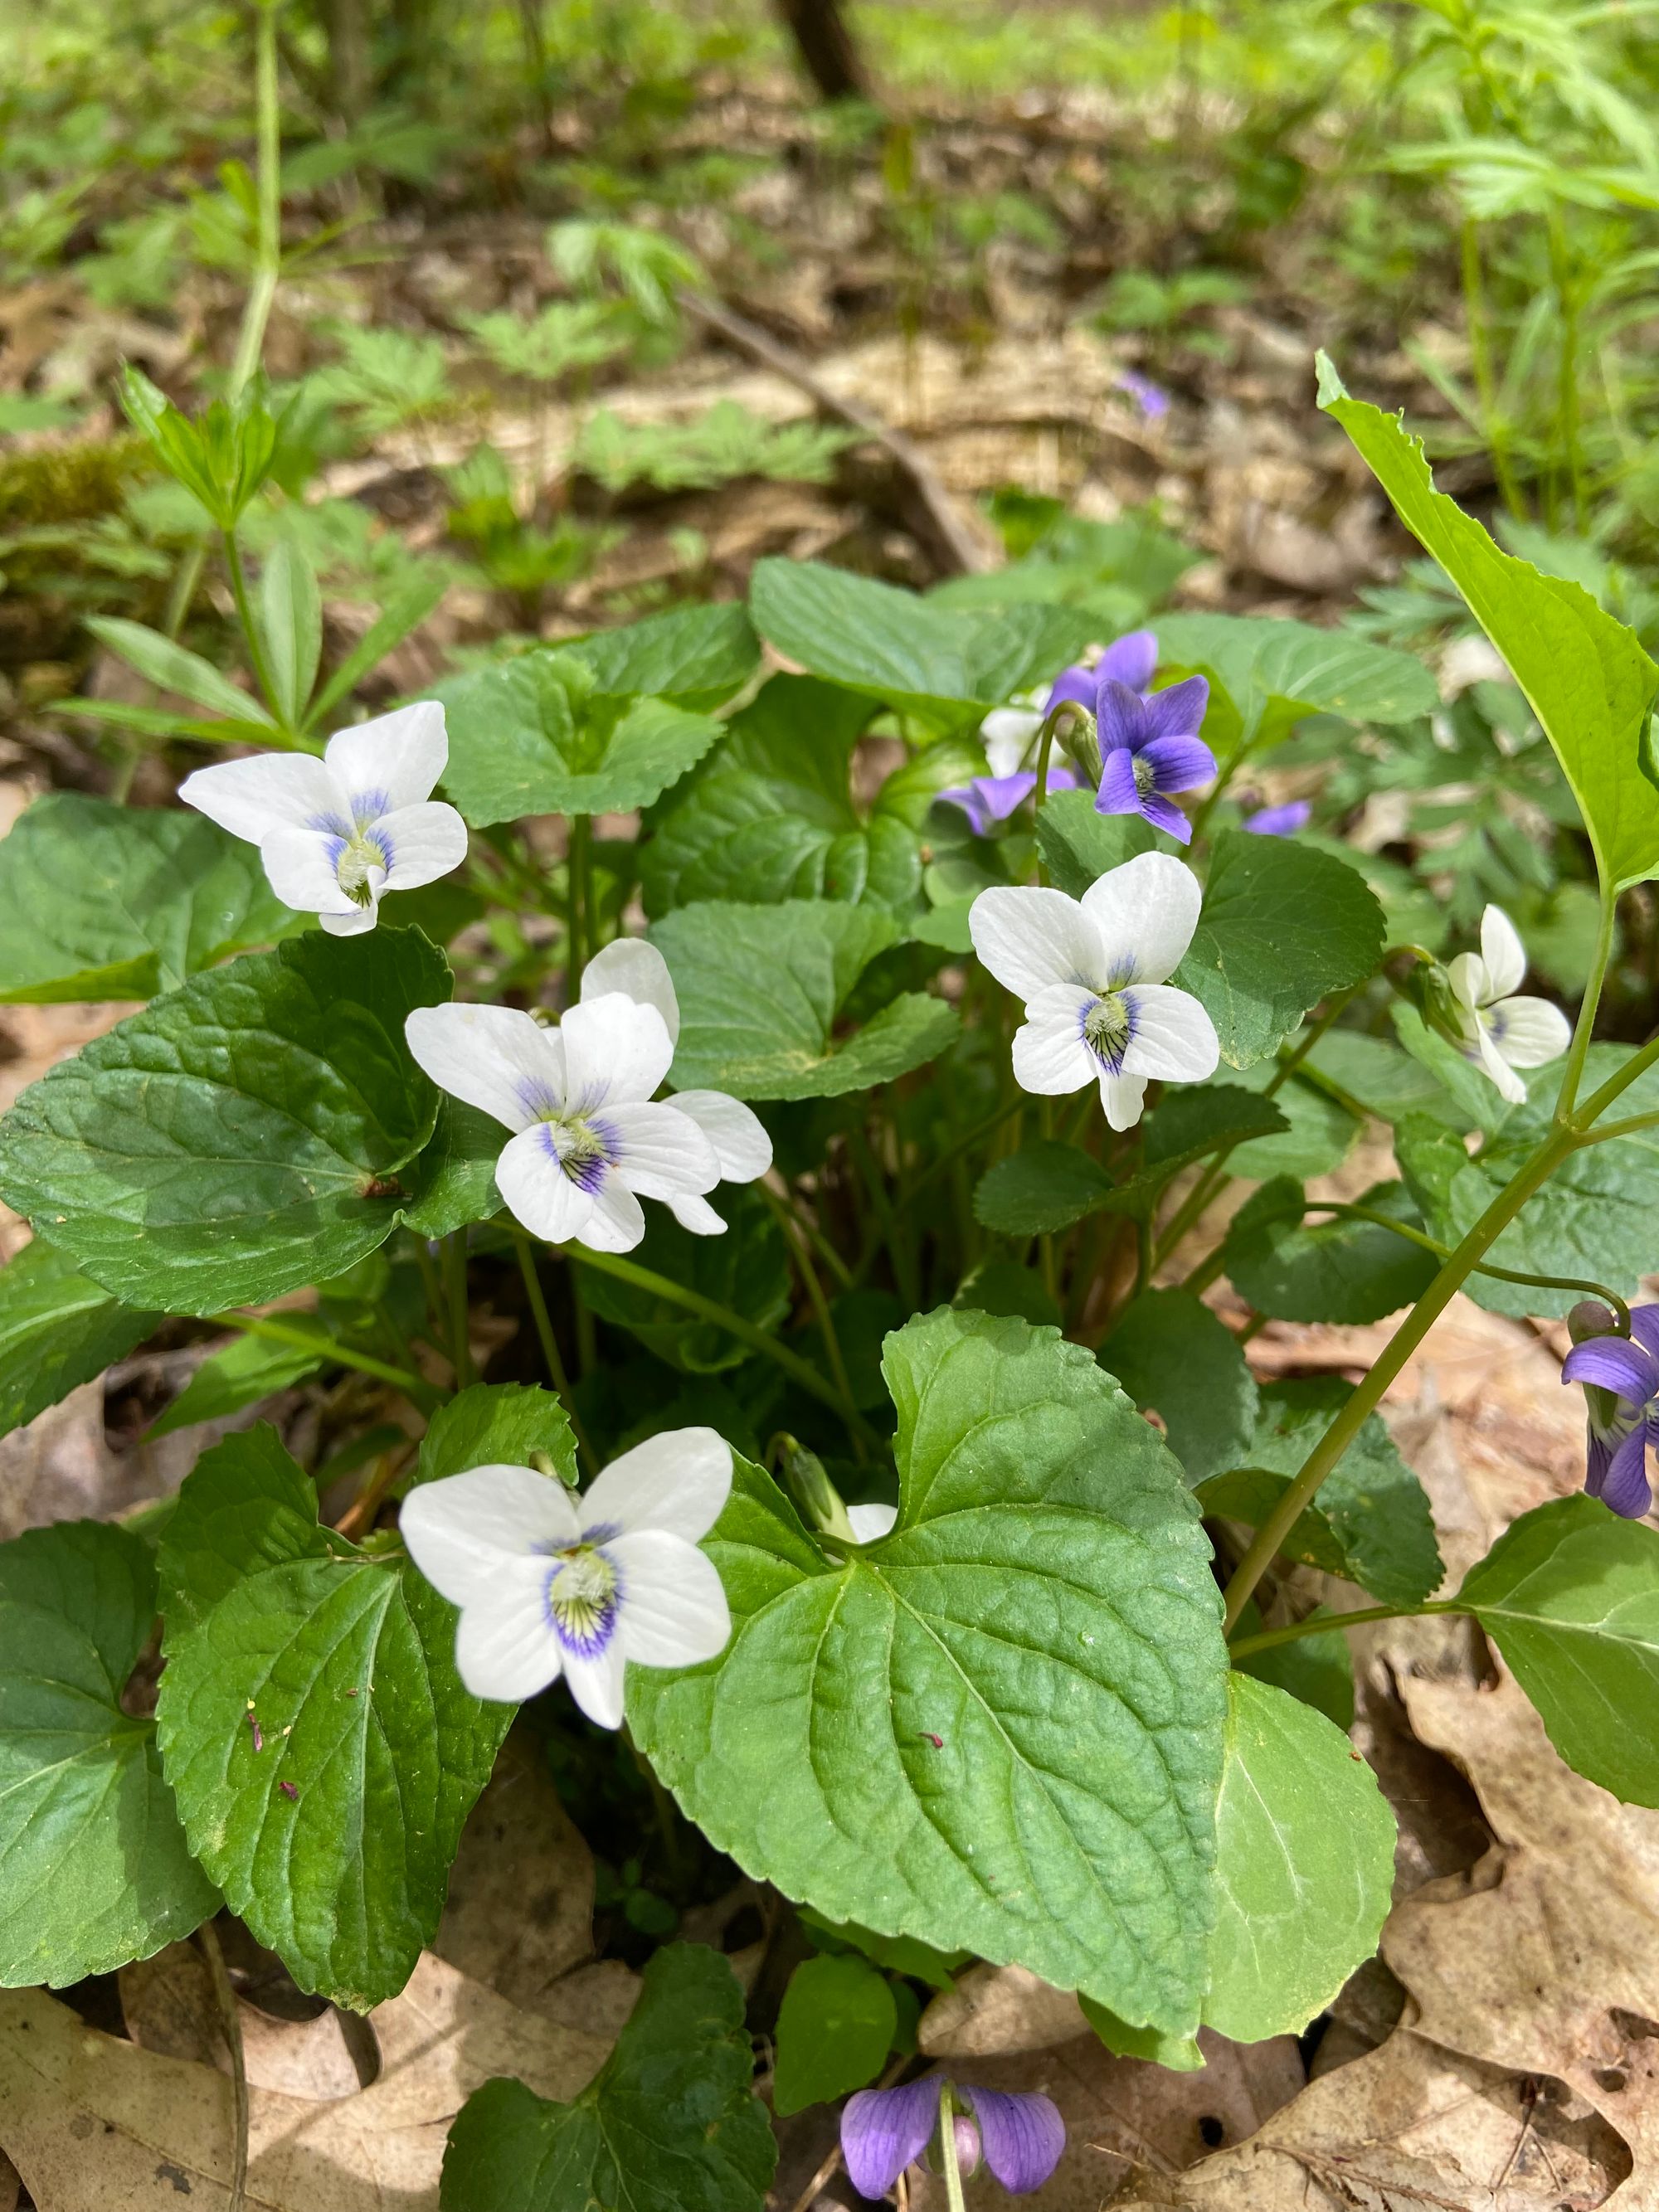 A cluster of white violet flowers